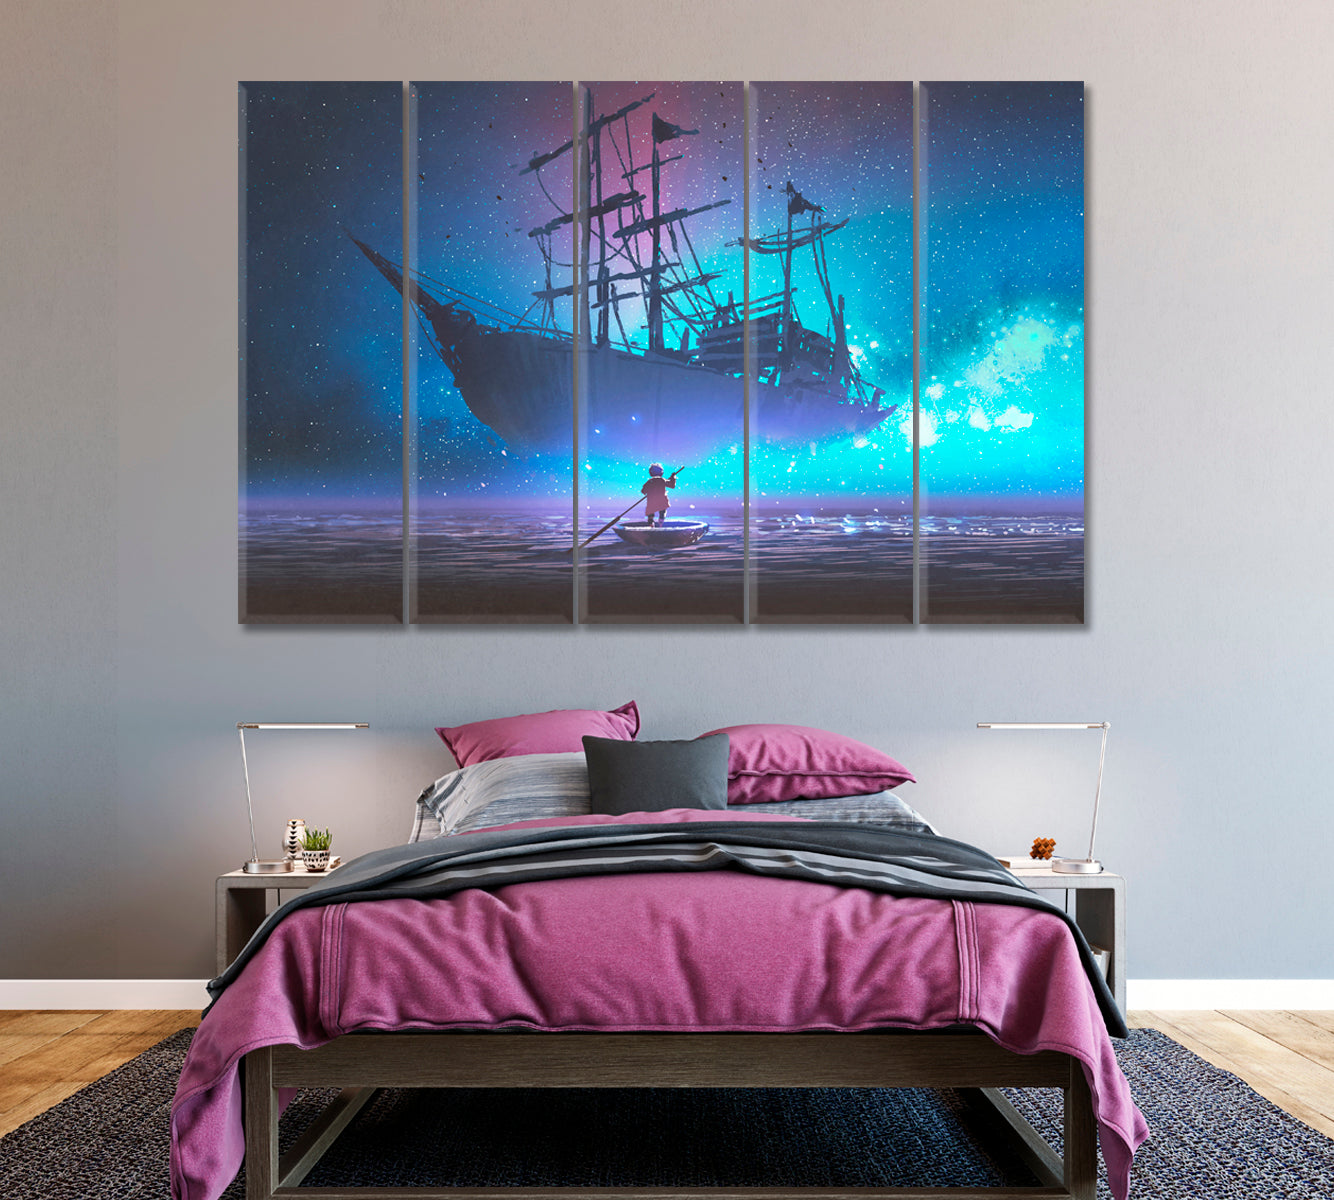 Sailing Ship Floating in Starry Sky Canvas Print ArtLexy 5 Panels 36"x24" inches 